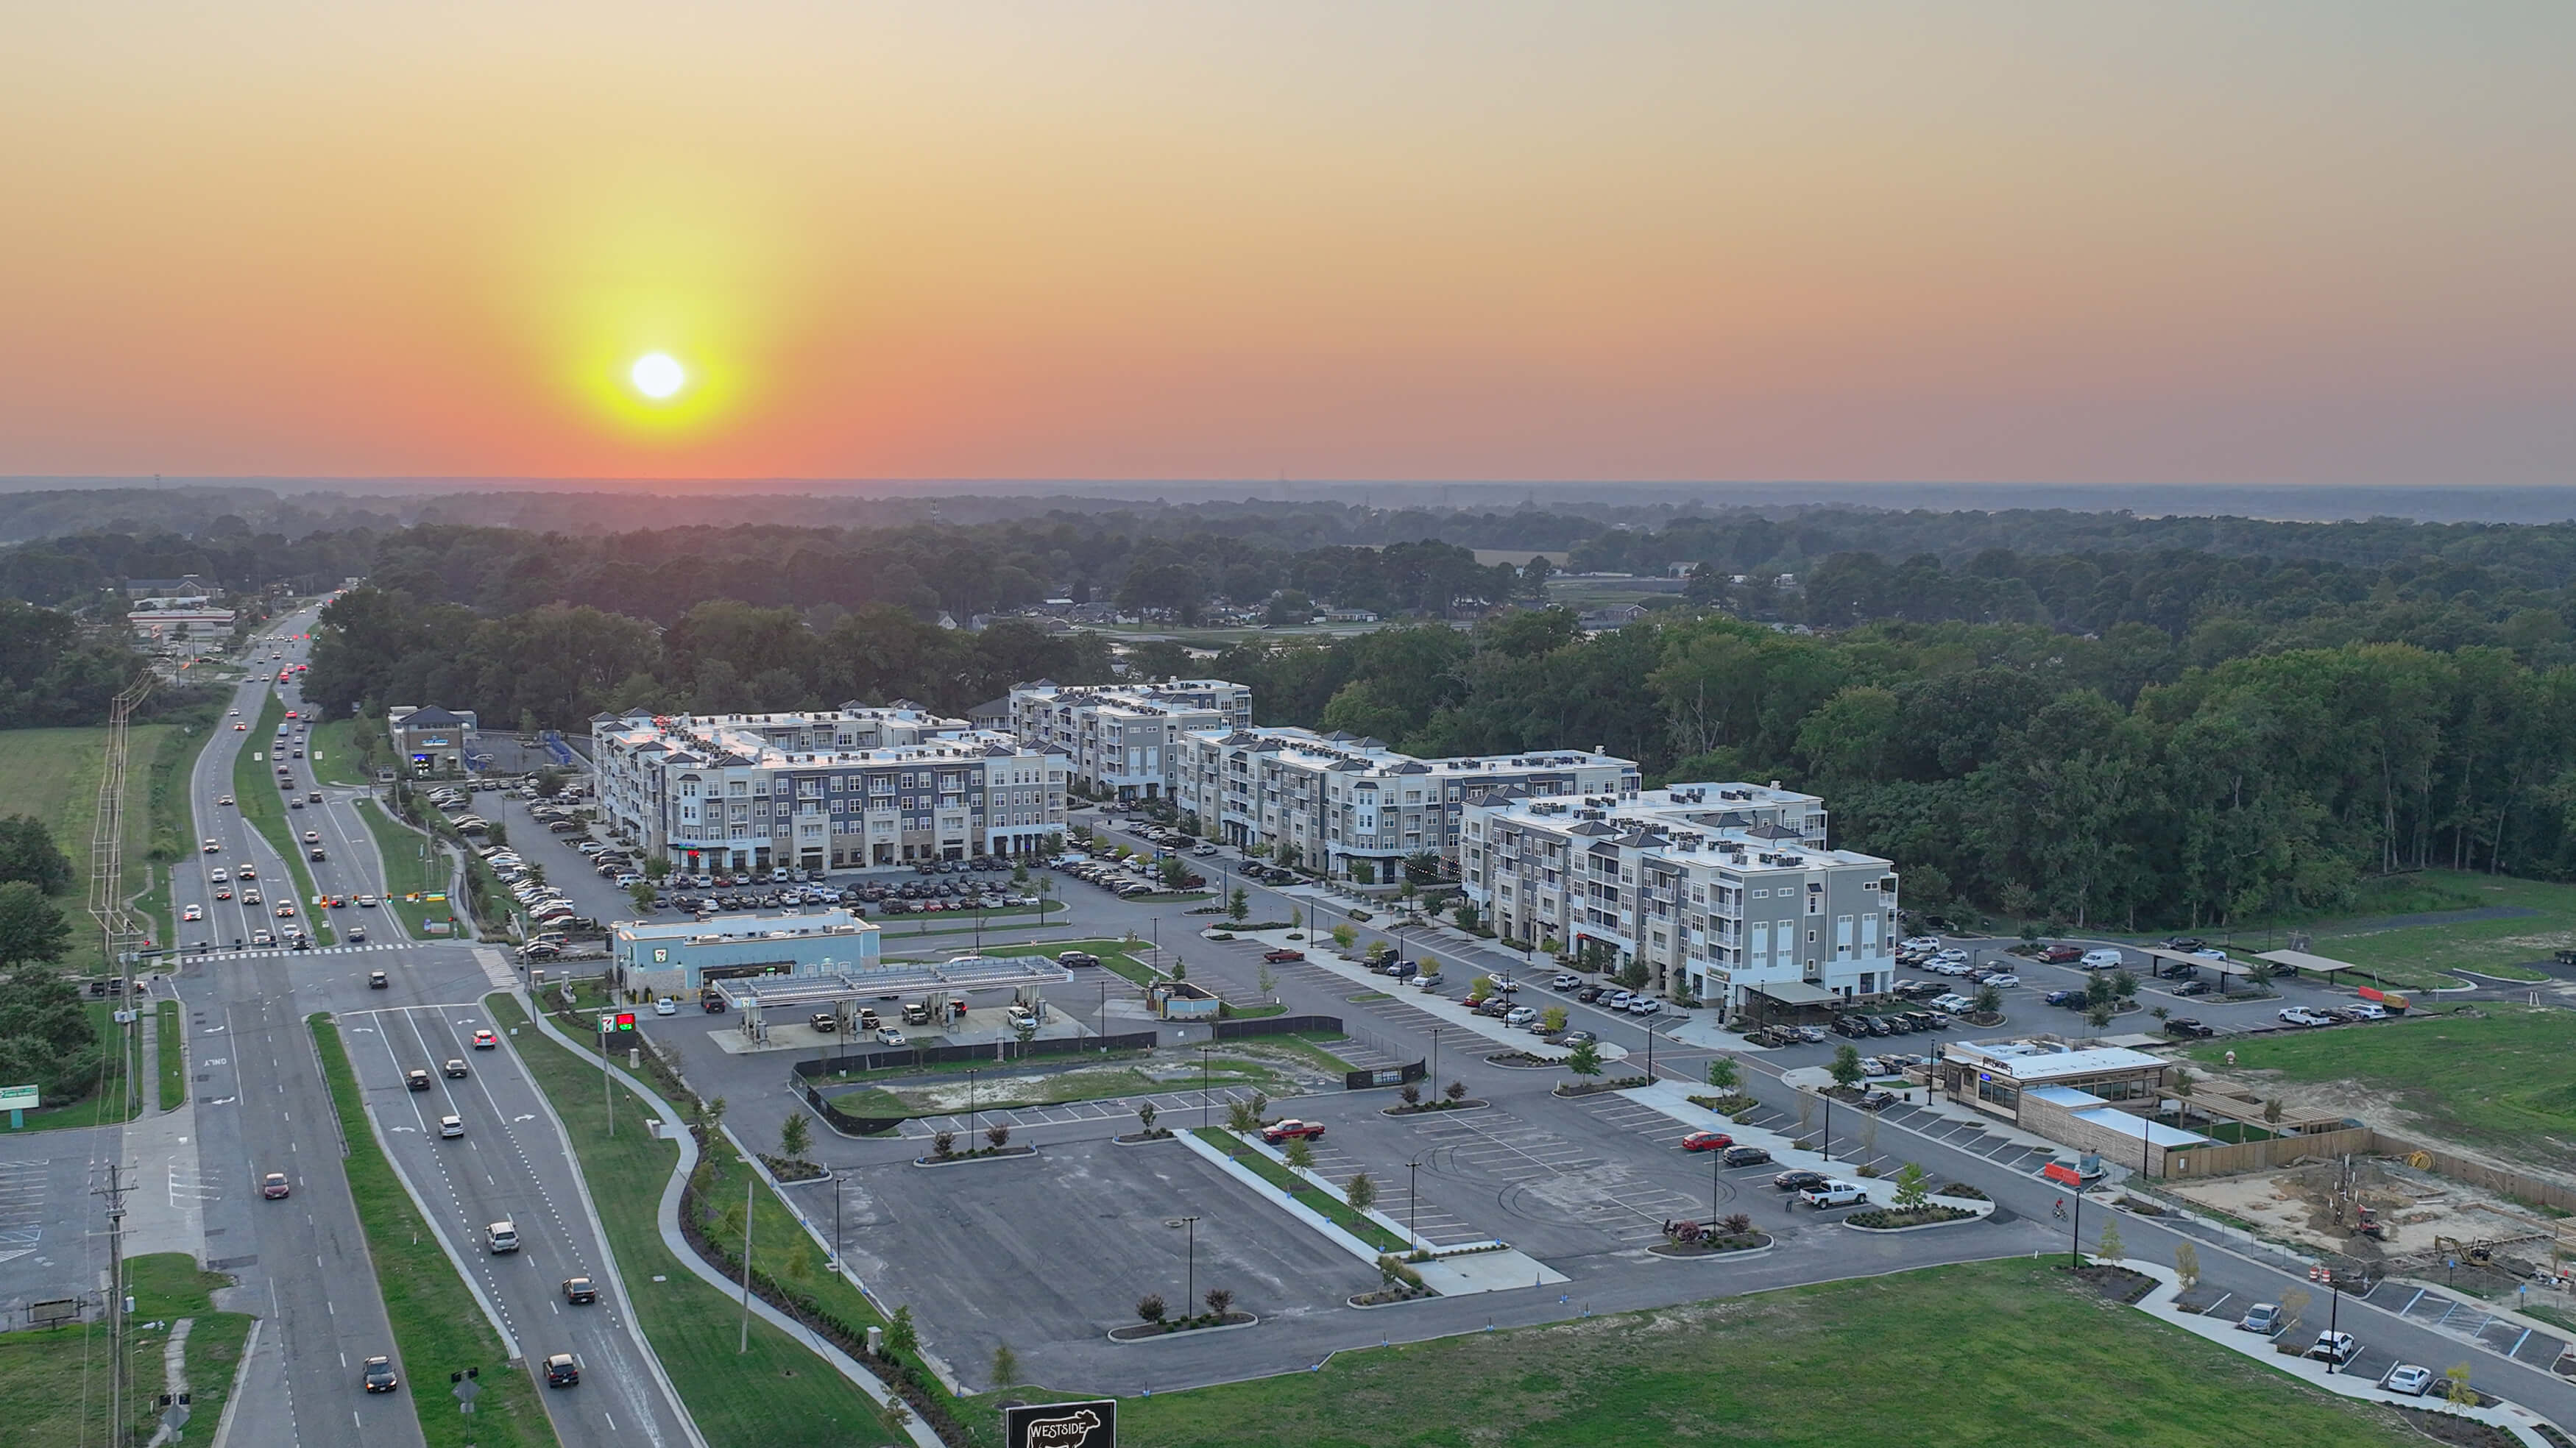 A view from the air showing the Bridgeport North Suffolk mixed-use development in the foreground, sunset in the distance